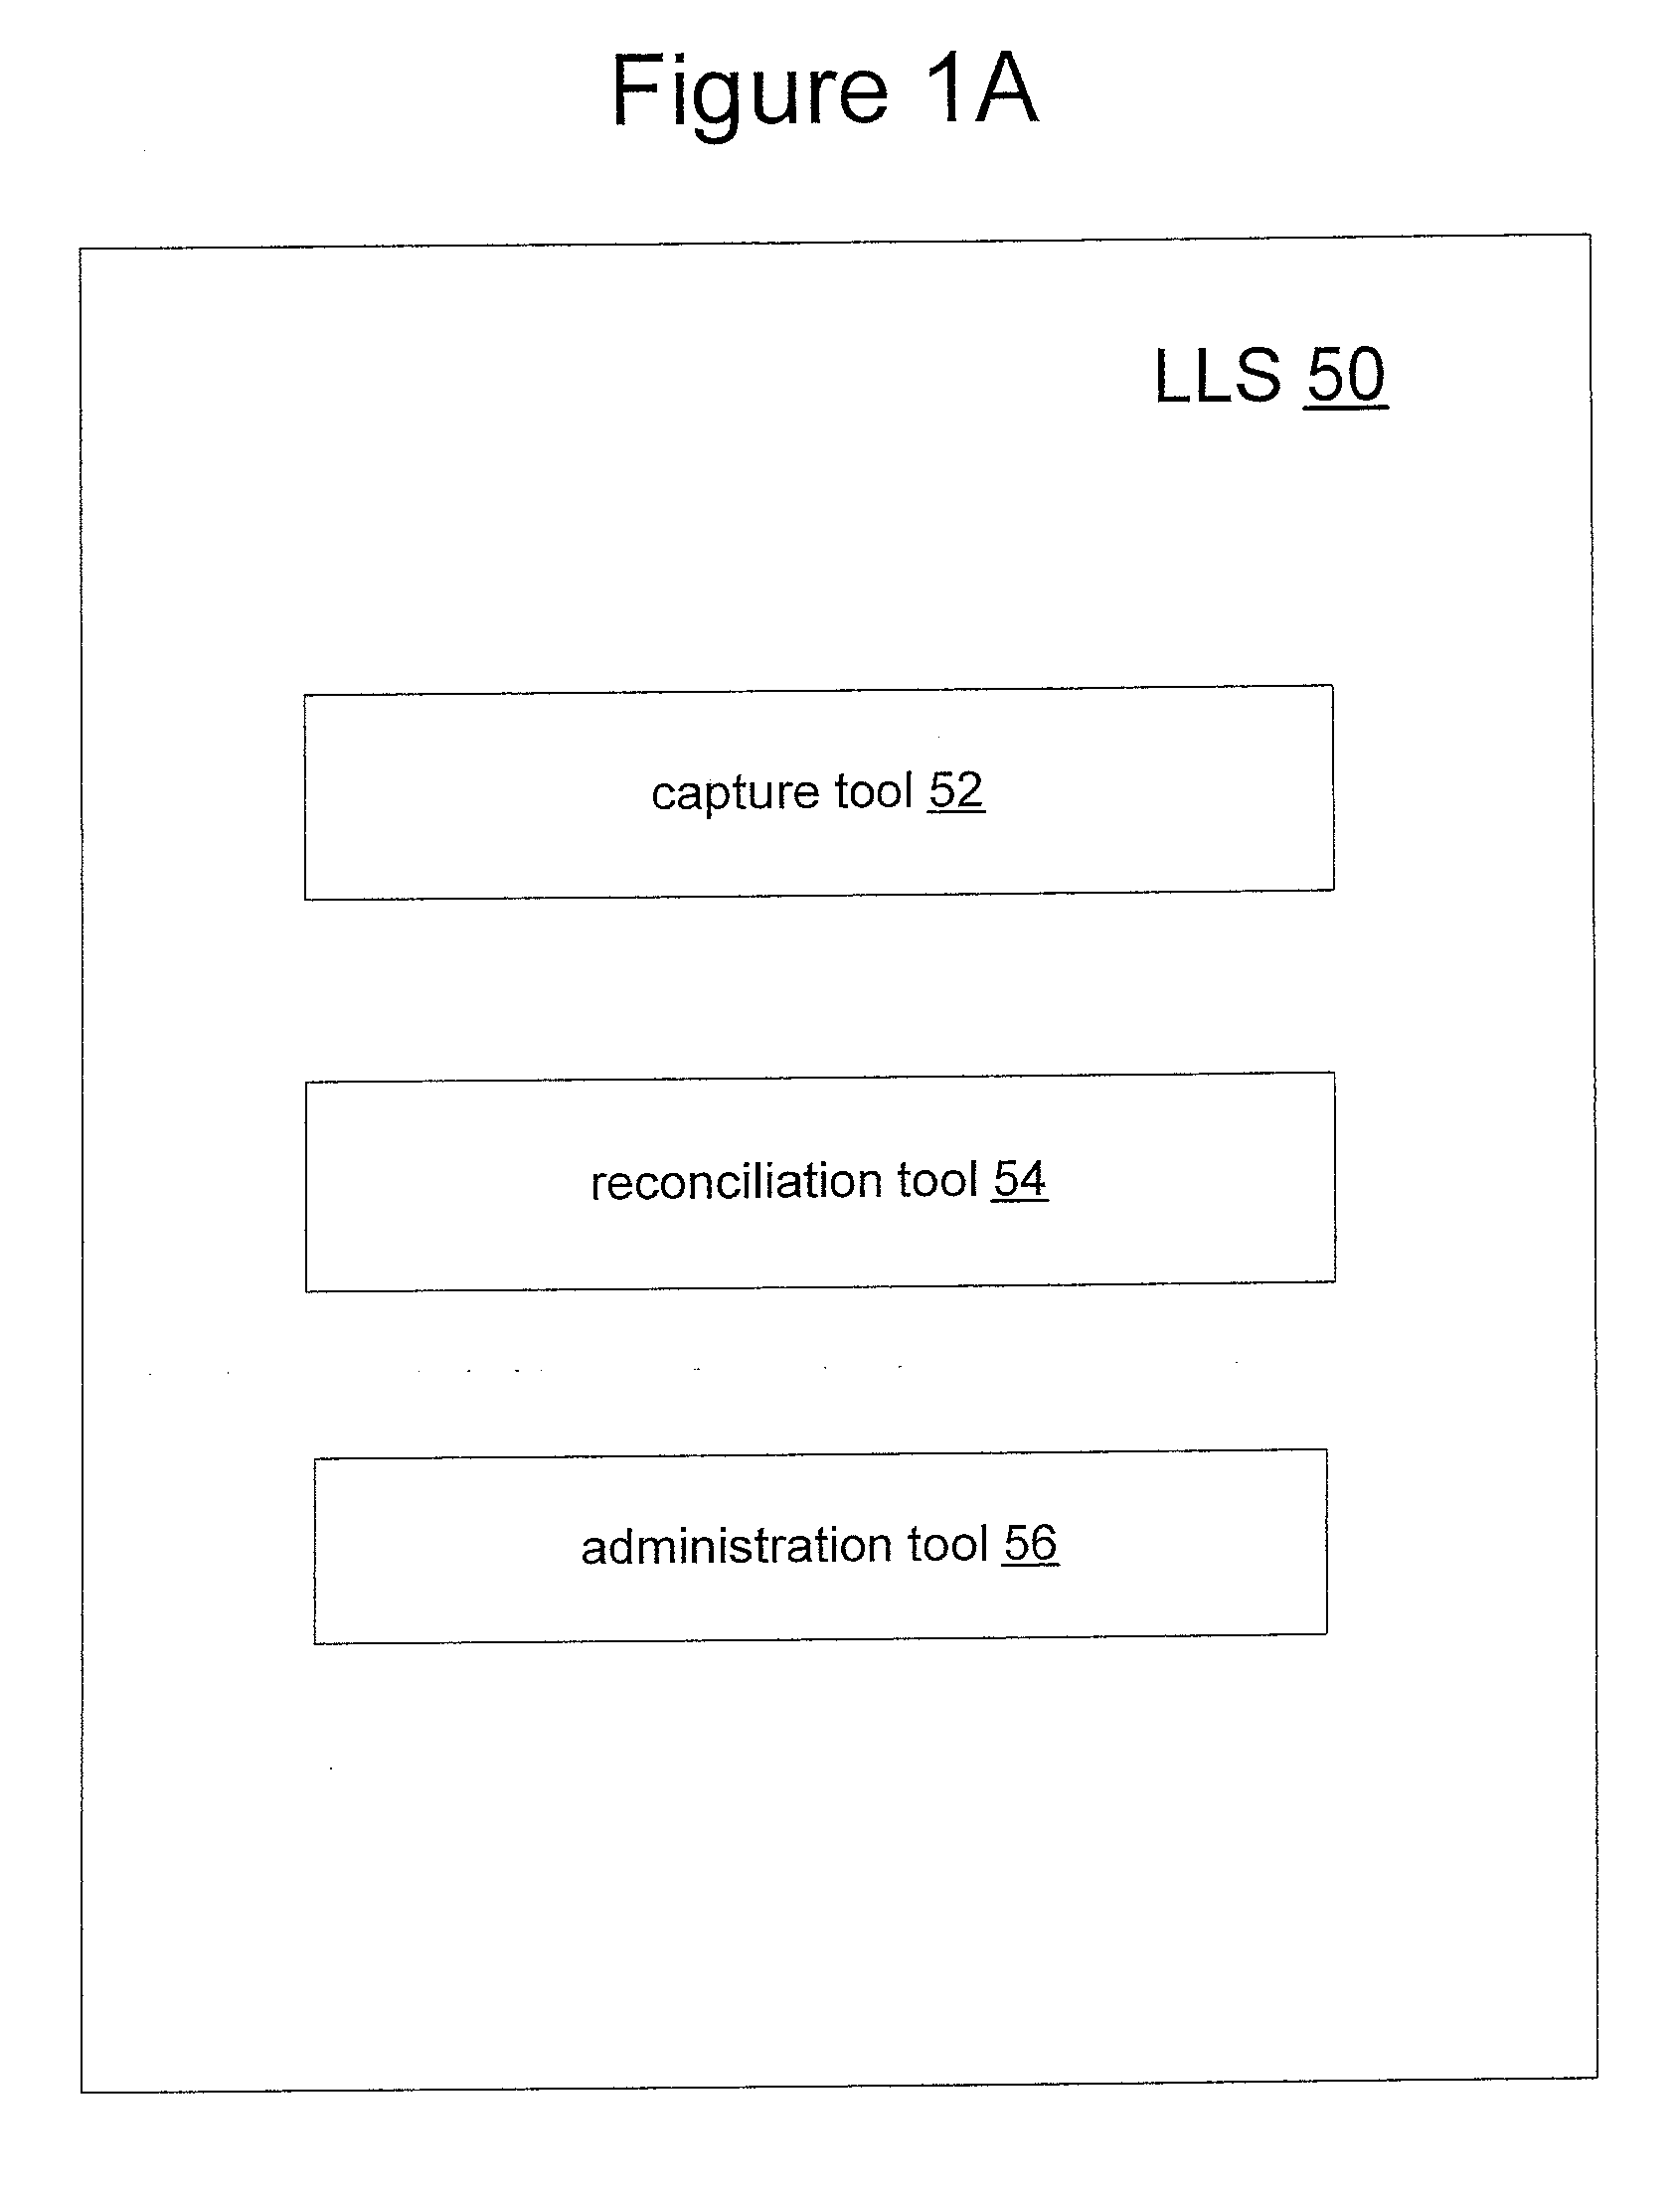 System for maintaining an escrow account for reimbursing administrators of payments